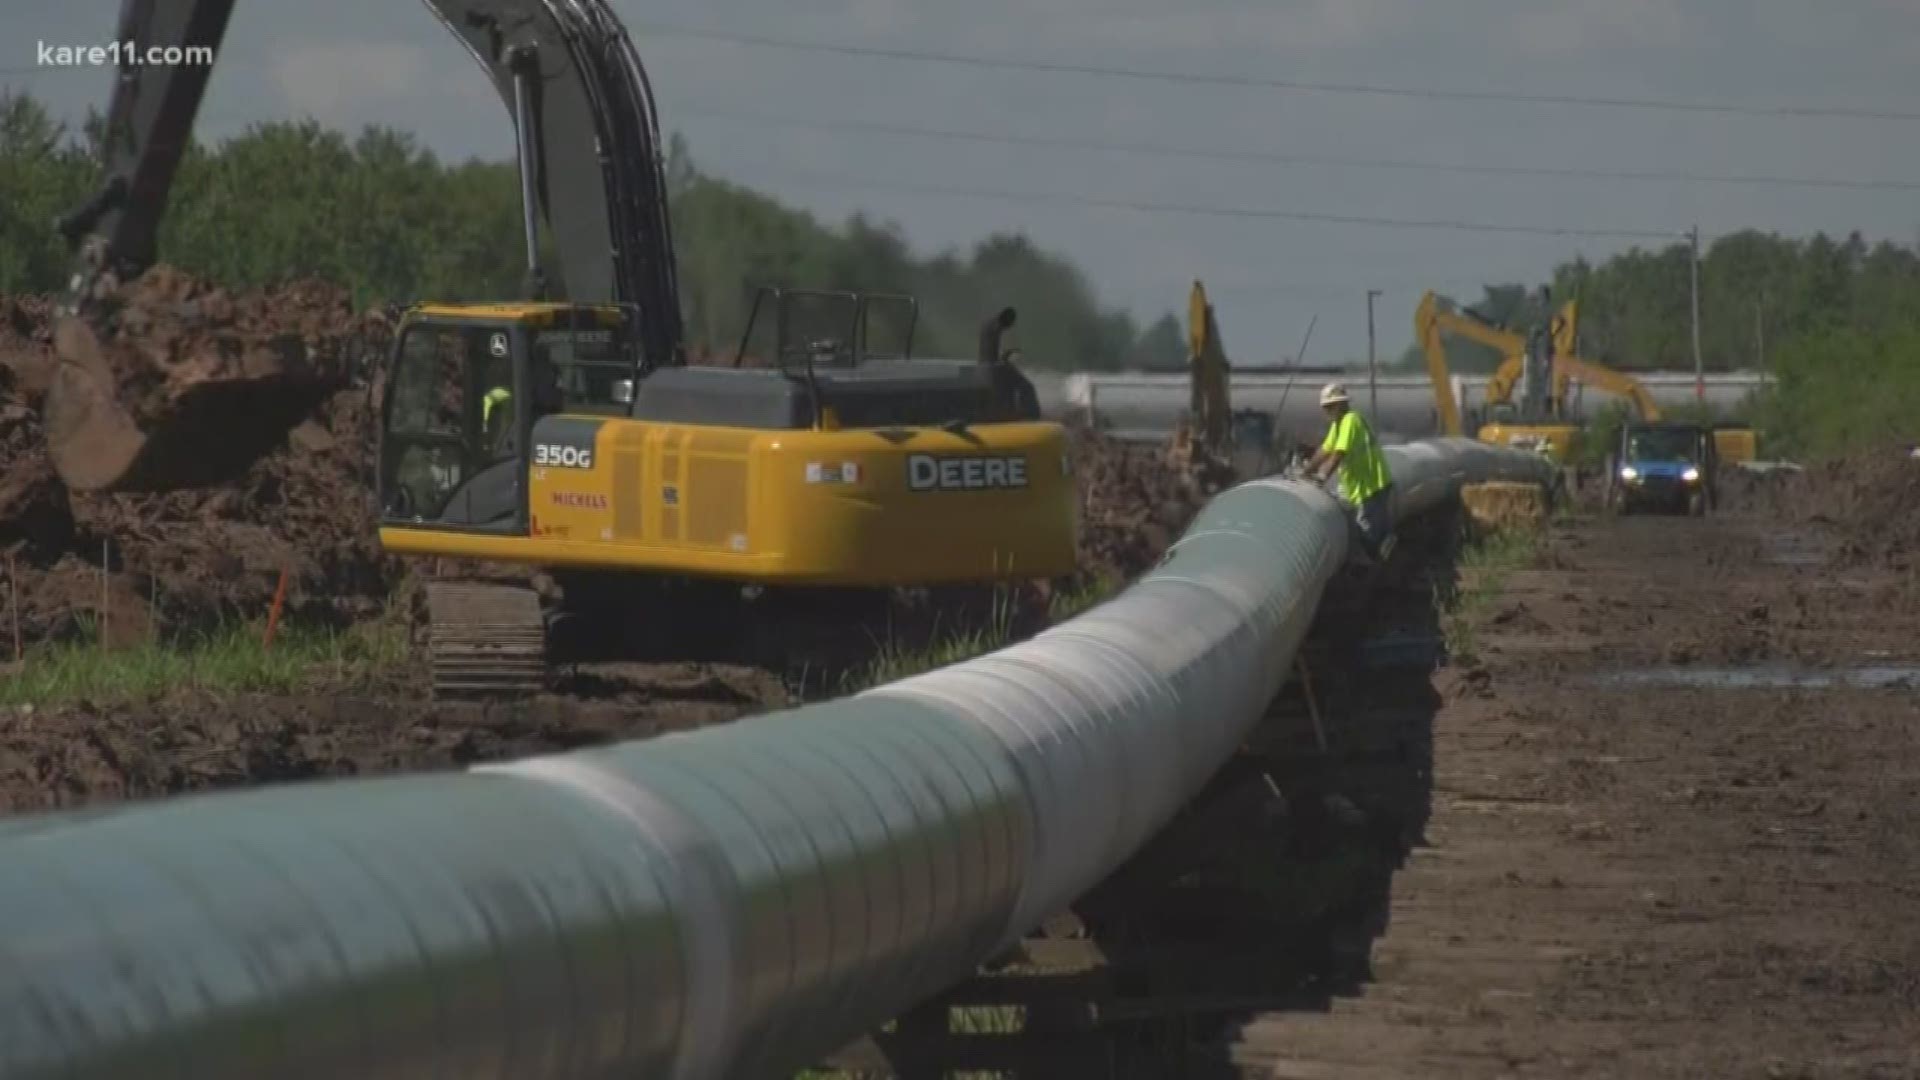 Regulators asked for a revised Environmental Impact Study for the Enbridge Line 3 Pipeline, gauging potential impacts of leaks on the watershed.